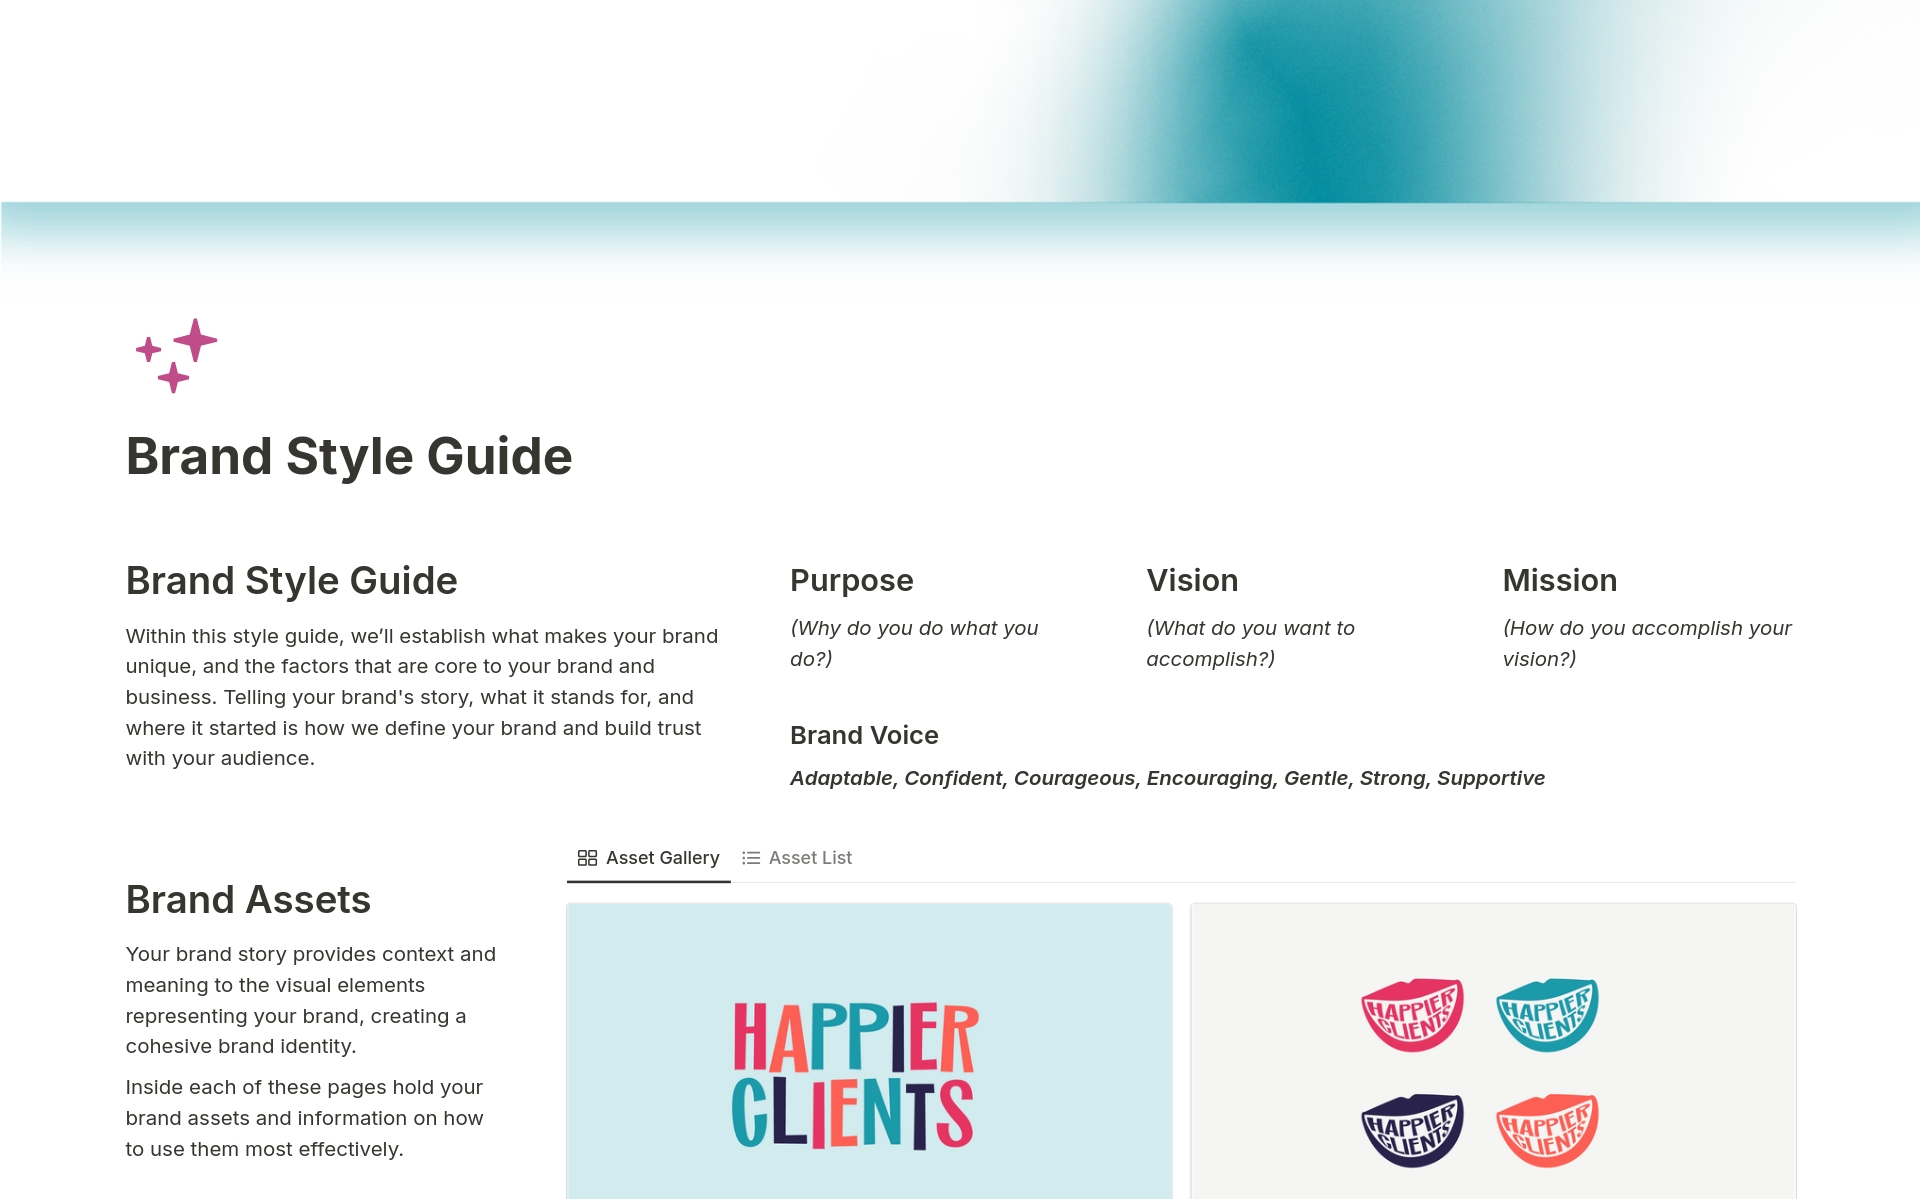 Streamline your client offboarding process and effortlessly inform your clients how to best use their new branding with this Brand Style Guide template.